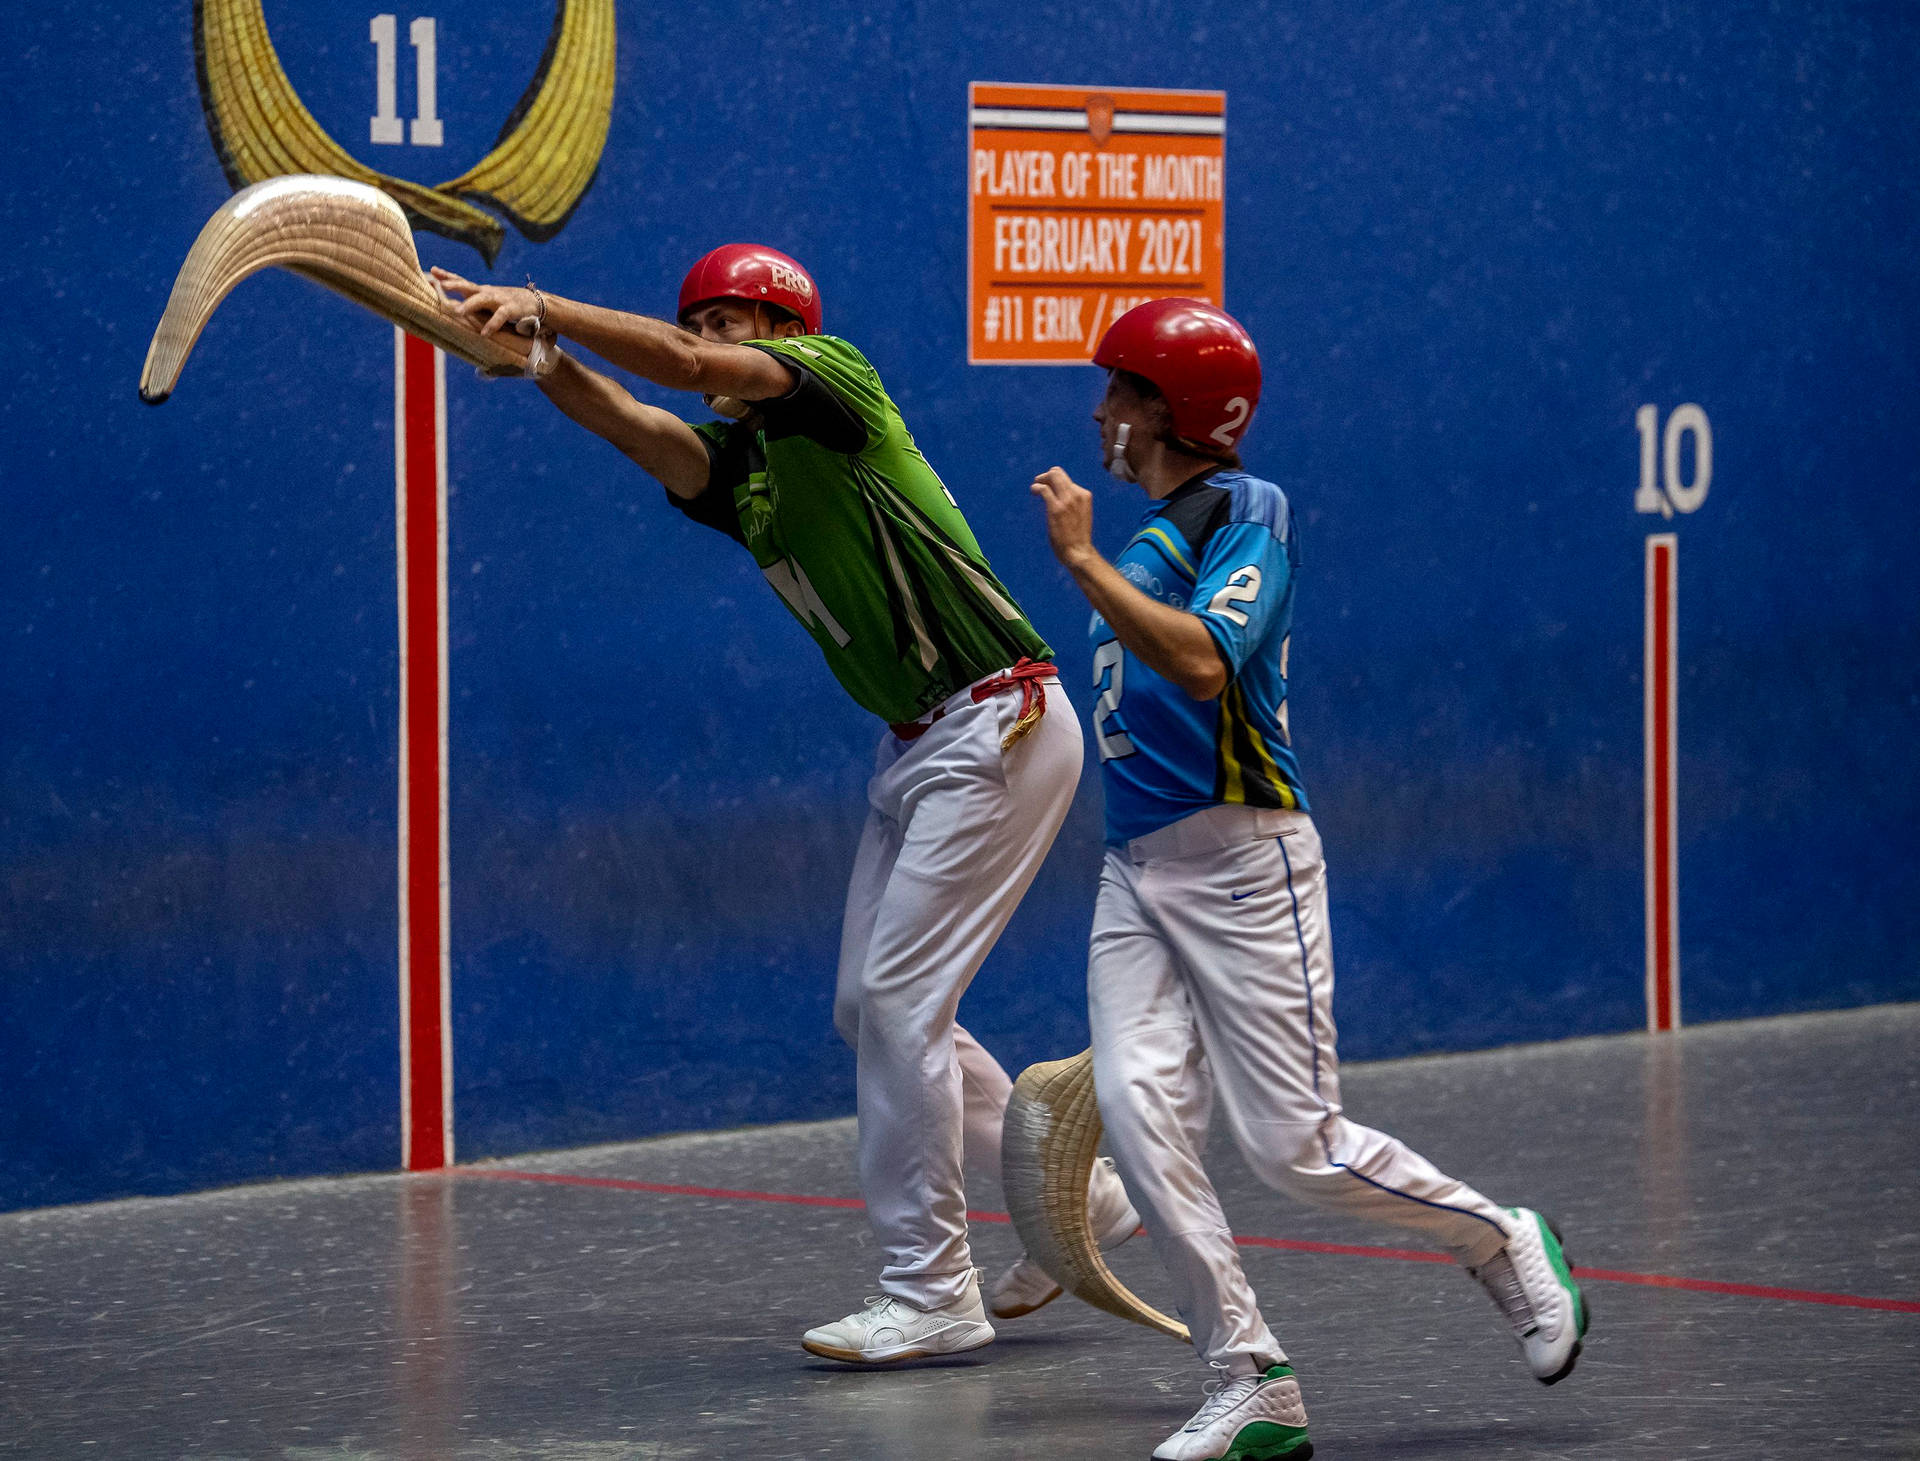 Exciting Action in Jai Alai Match Wallpaper